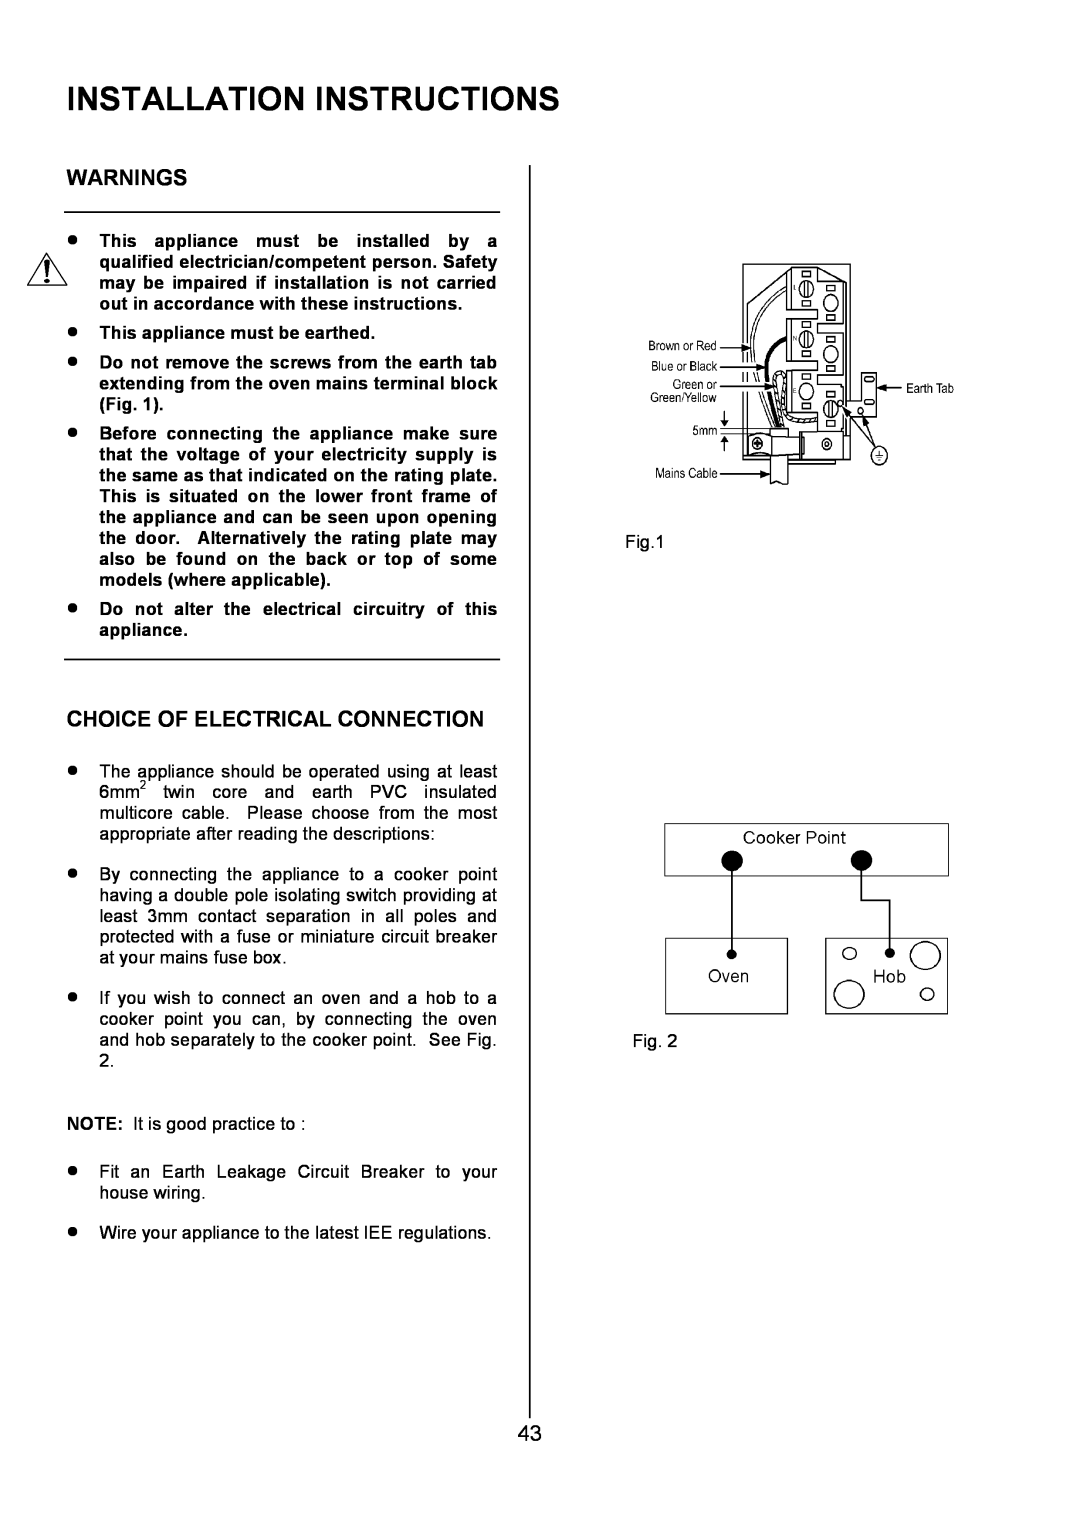 AEG 311704300, U7101-4 manual Installation Instructions, Warnings, Choice Of Electrical Connection 